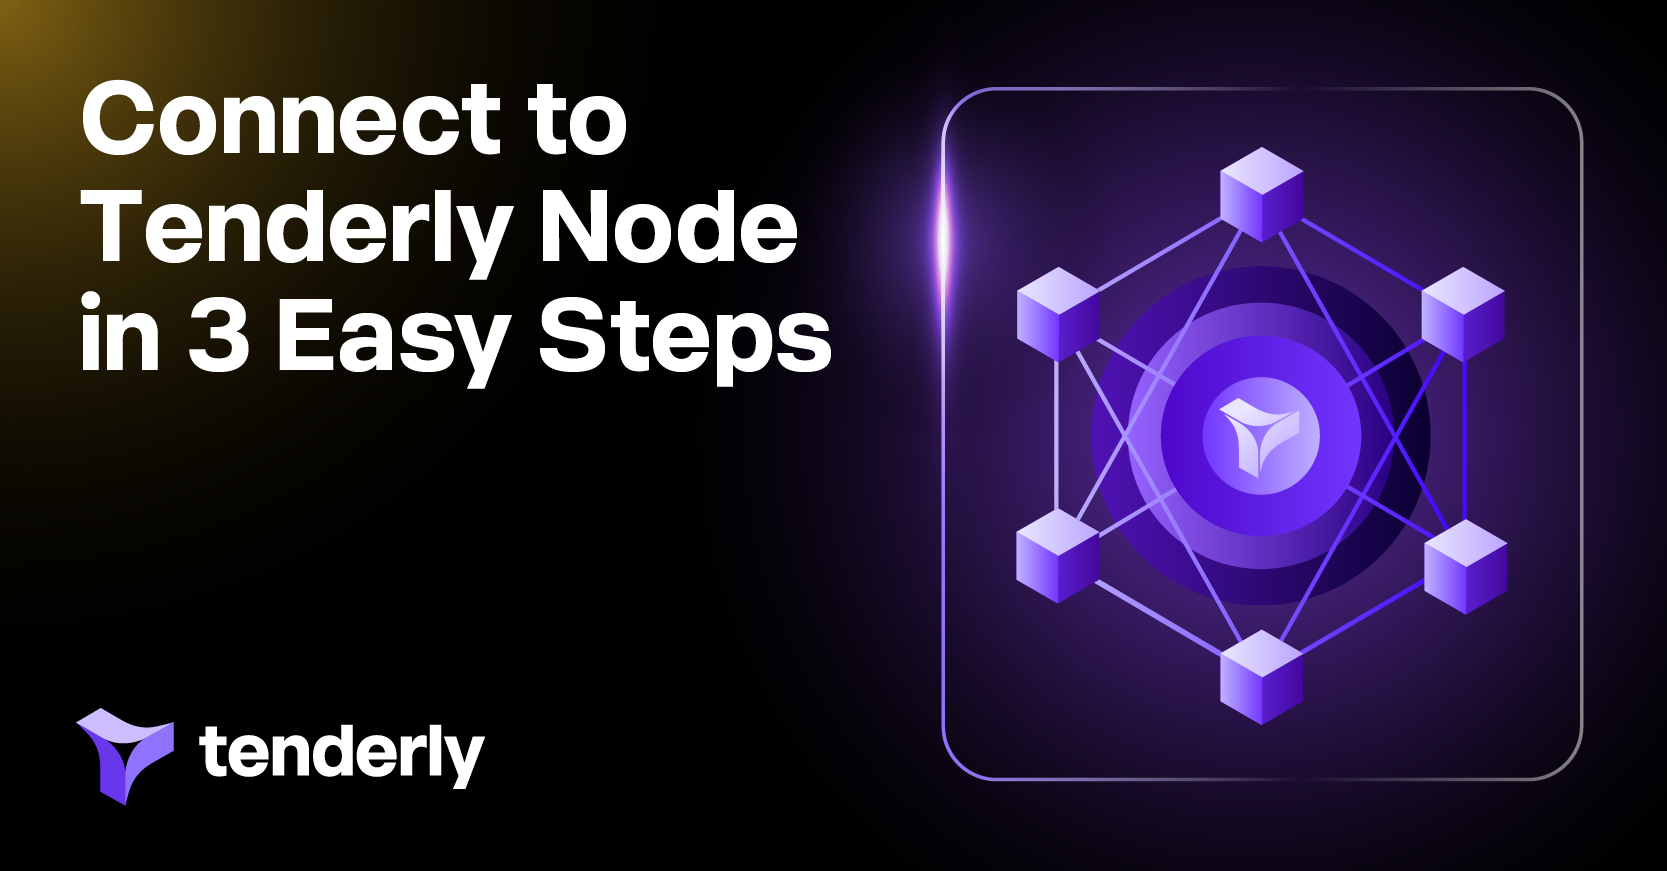 Getting Started with Tenderly Node